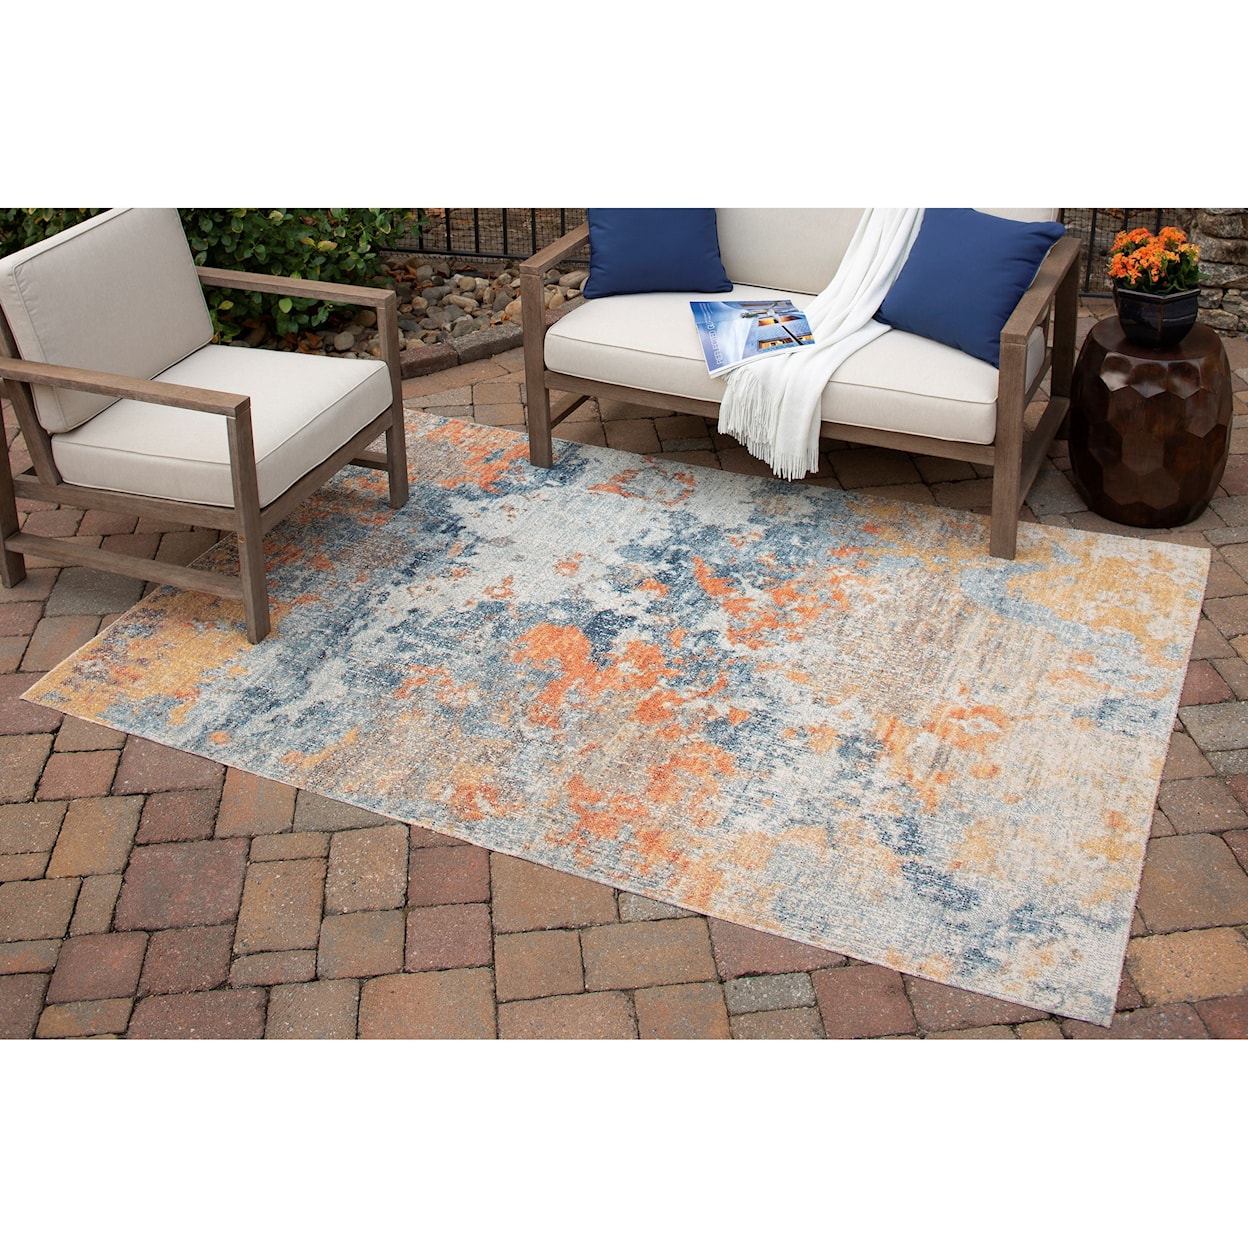 Signature Design by Ashley Contemporary Area Rugs Wraylen Indoor/Outdoor Large Rug